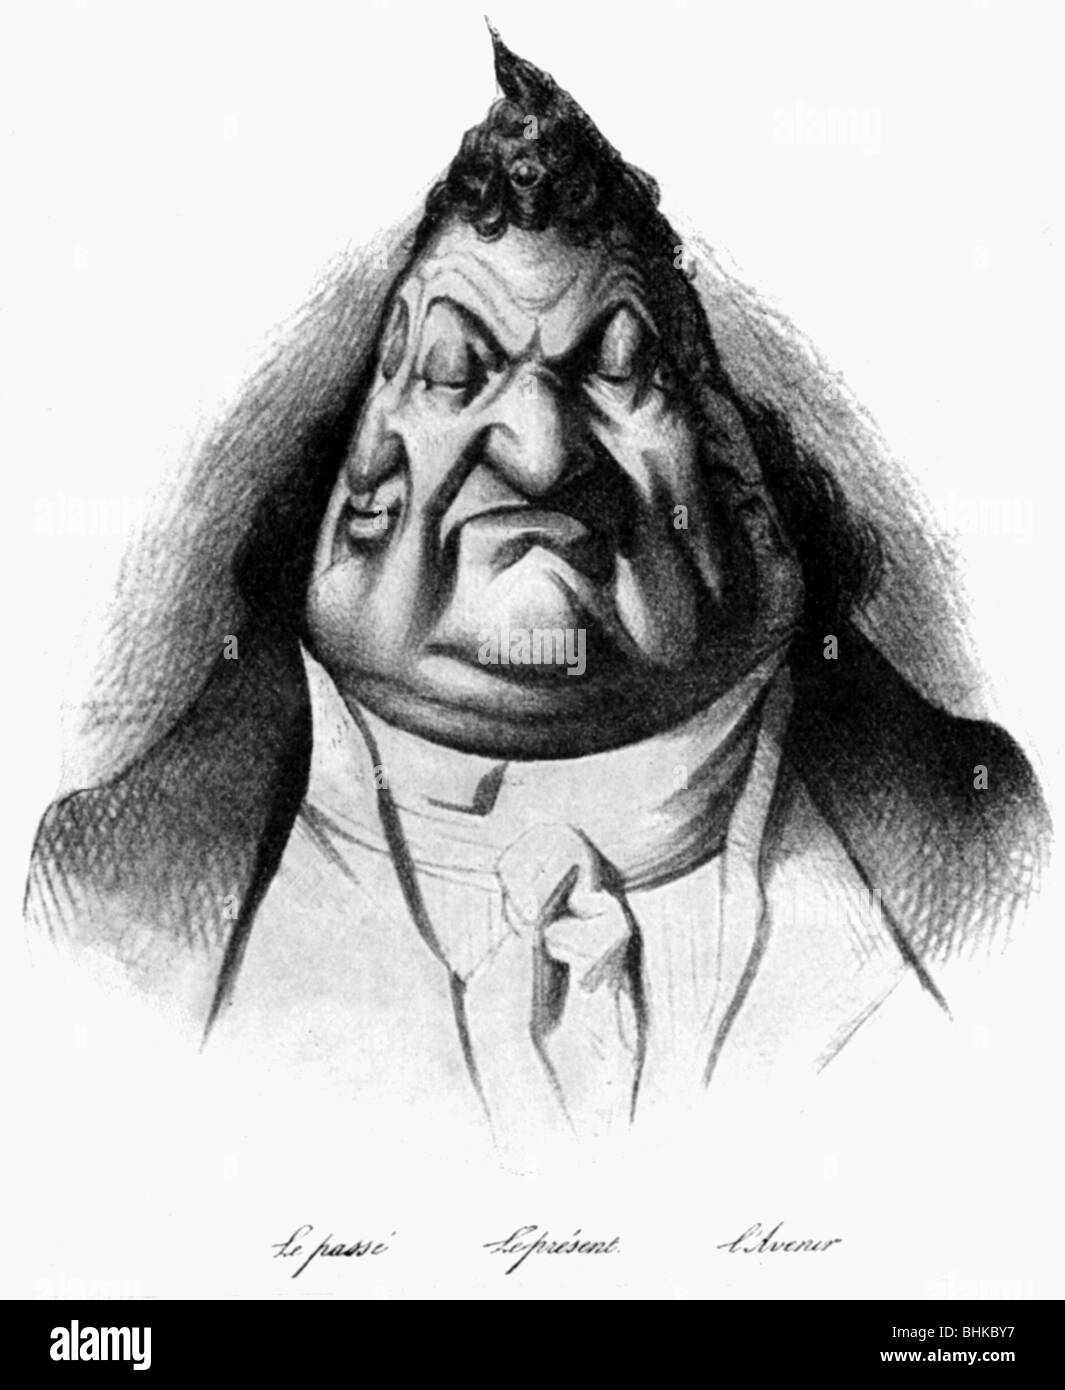 Louis Philippe, 6.10.1773 - 26. 8.1850, King of France 7.8.1830 -  24.2.1848, caricature, The Patience of the People, 1840s Stock Photo -  Alamy